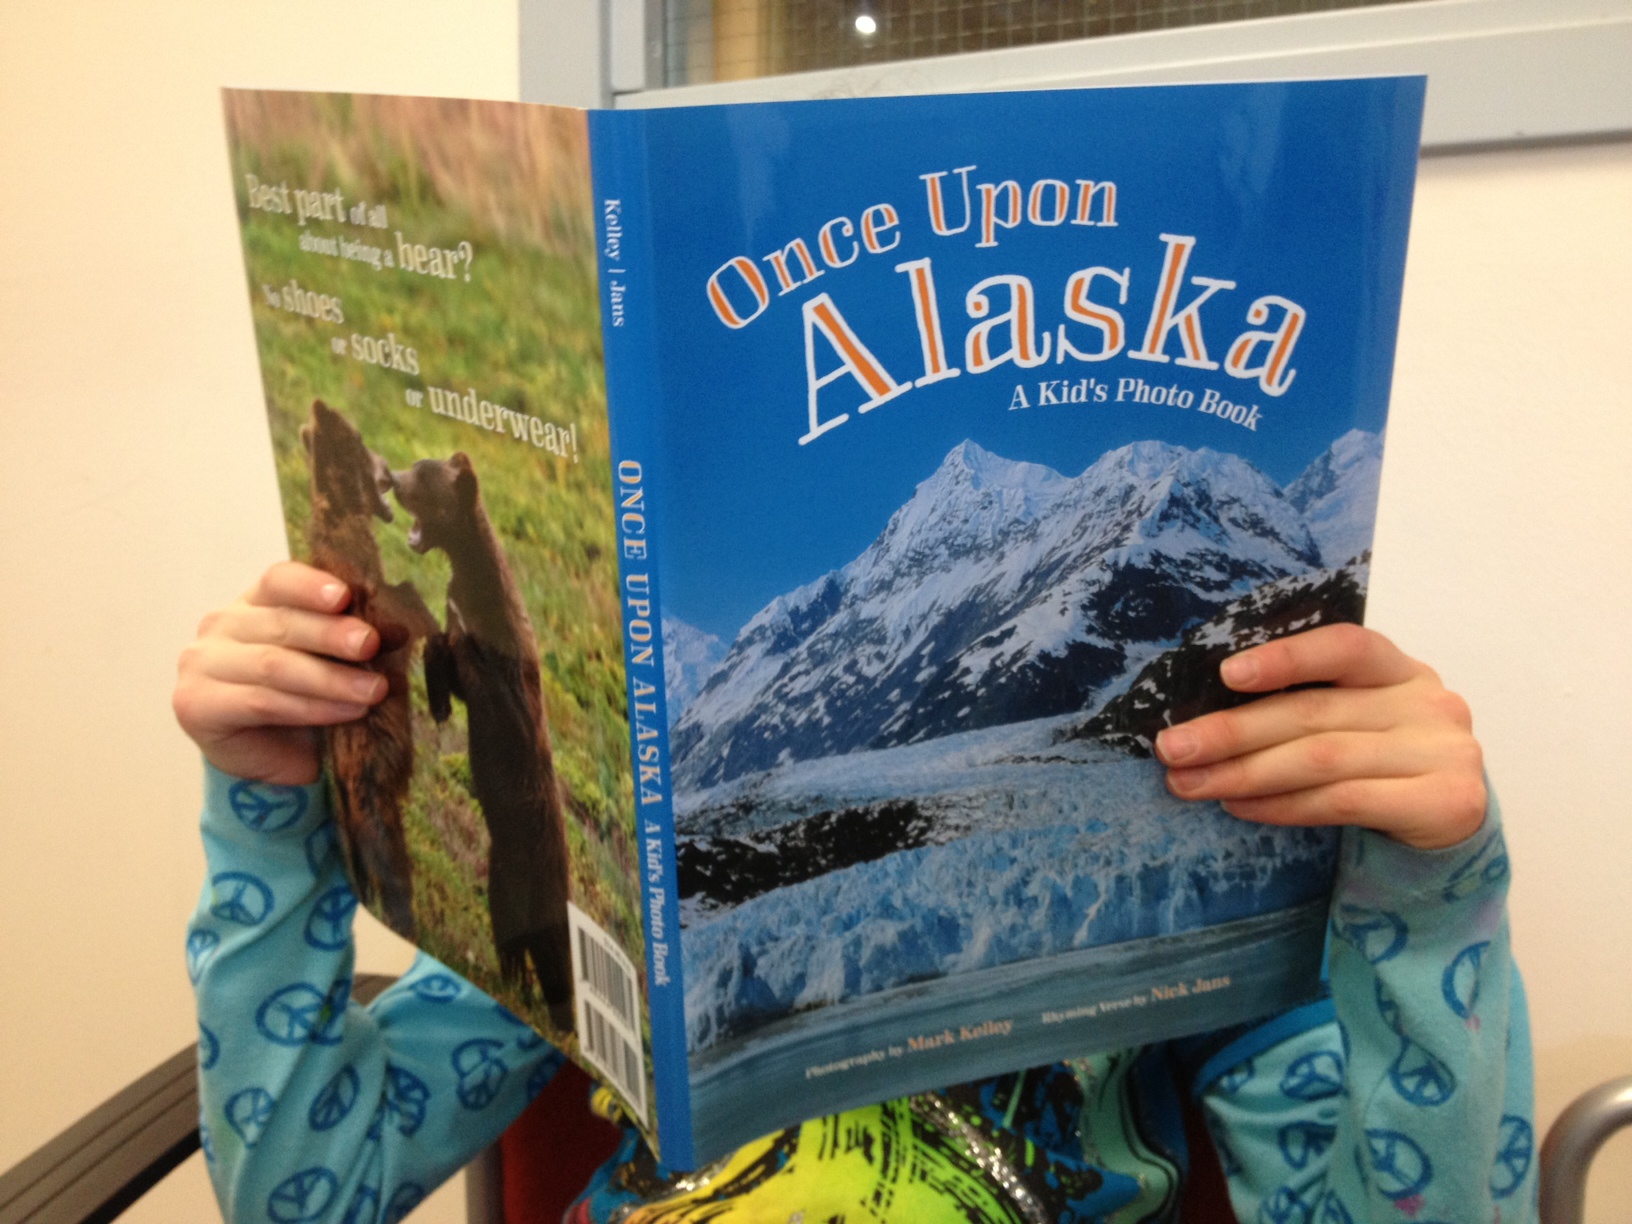 "Once Upon Alaska, A Kid's Photo Book" is a collaboration between writer Nick Jans and photographer Mark Kelley. (Photo by Lisa Phu/KTOO)